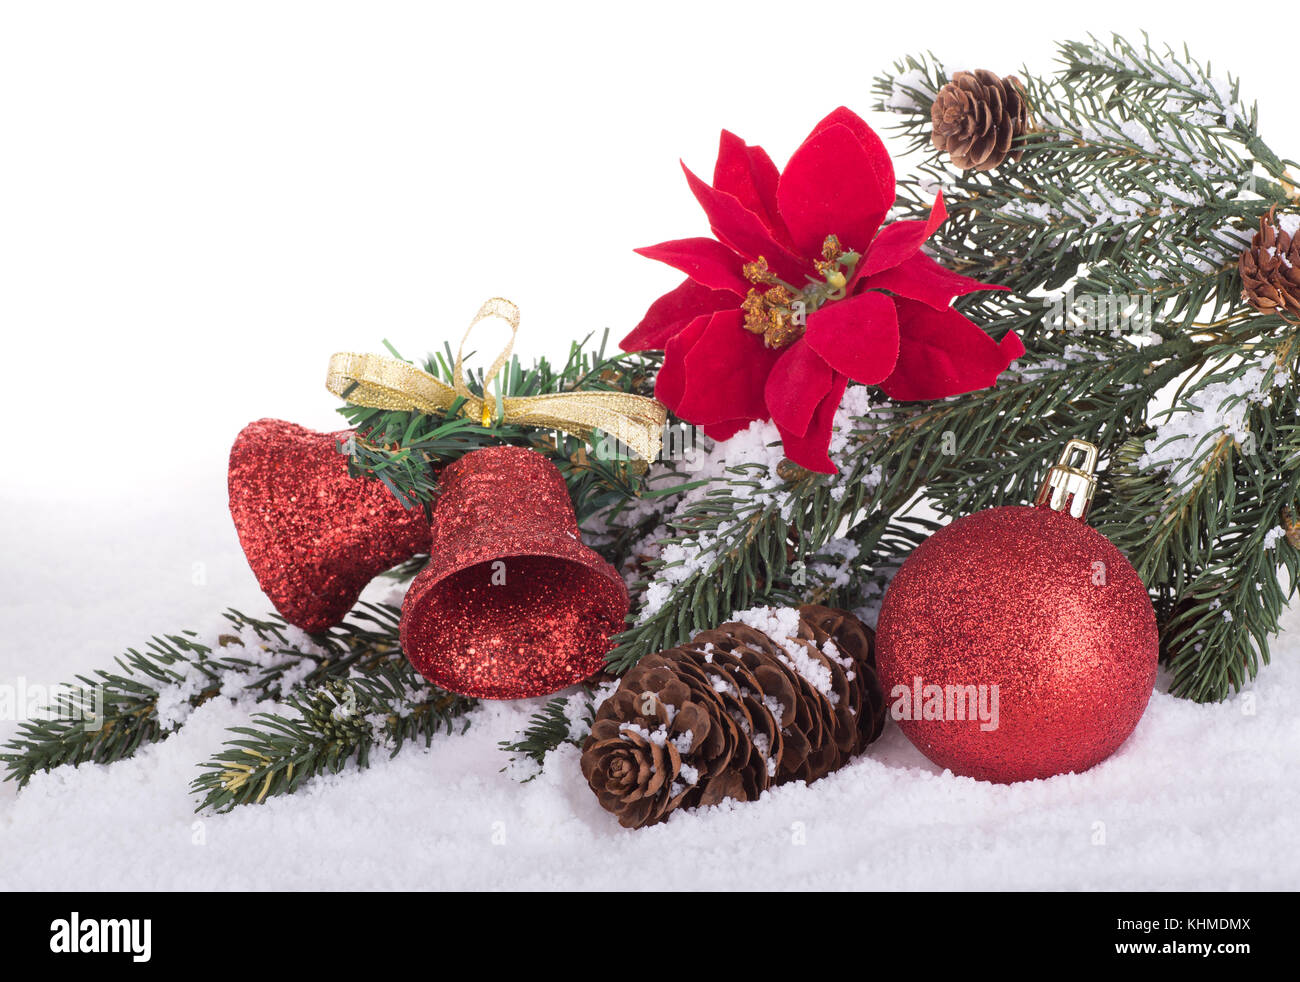 Colorful Christmas decorations in snow with white background Stock Photo